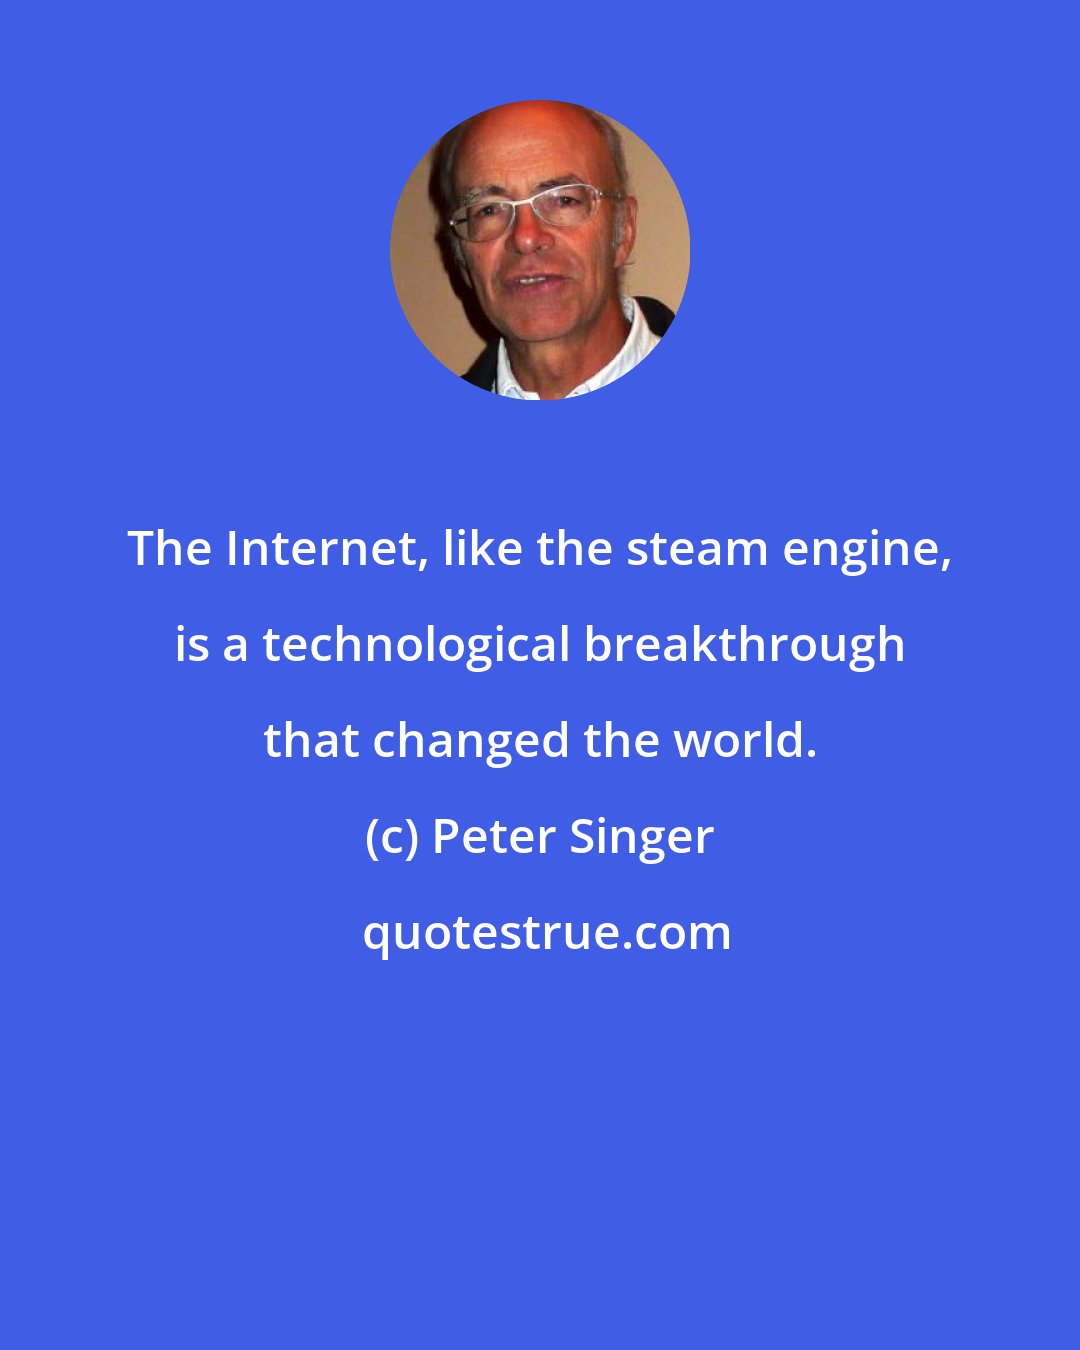 Peter Singer: The Internet, like the steam engine, is a technological breakthrough that changed the world.